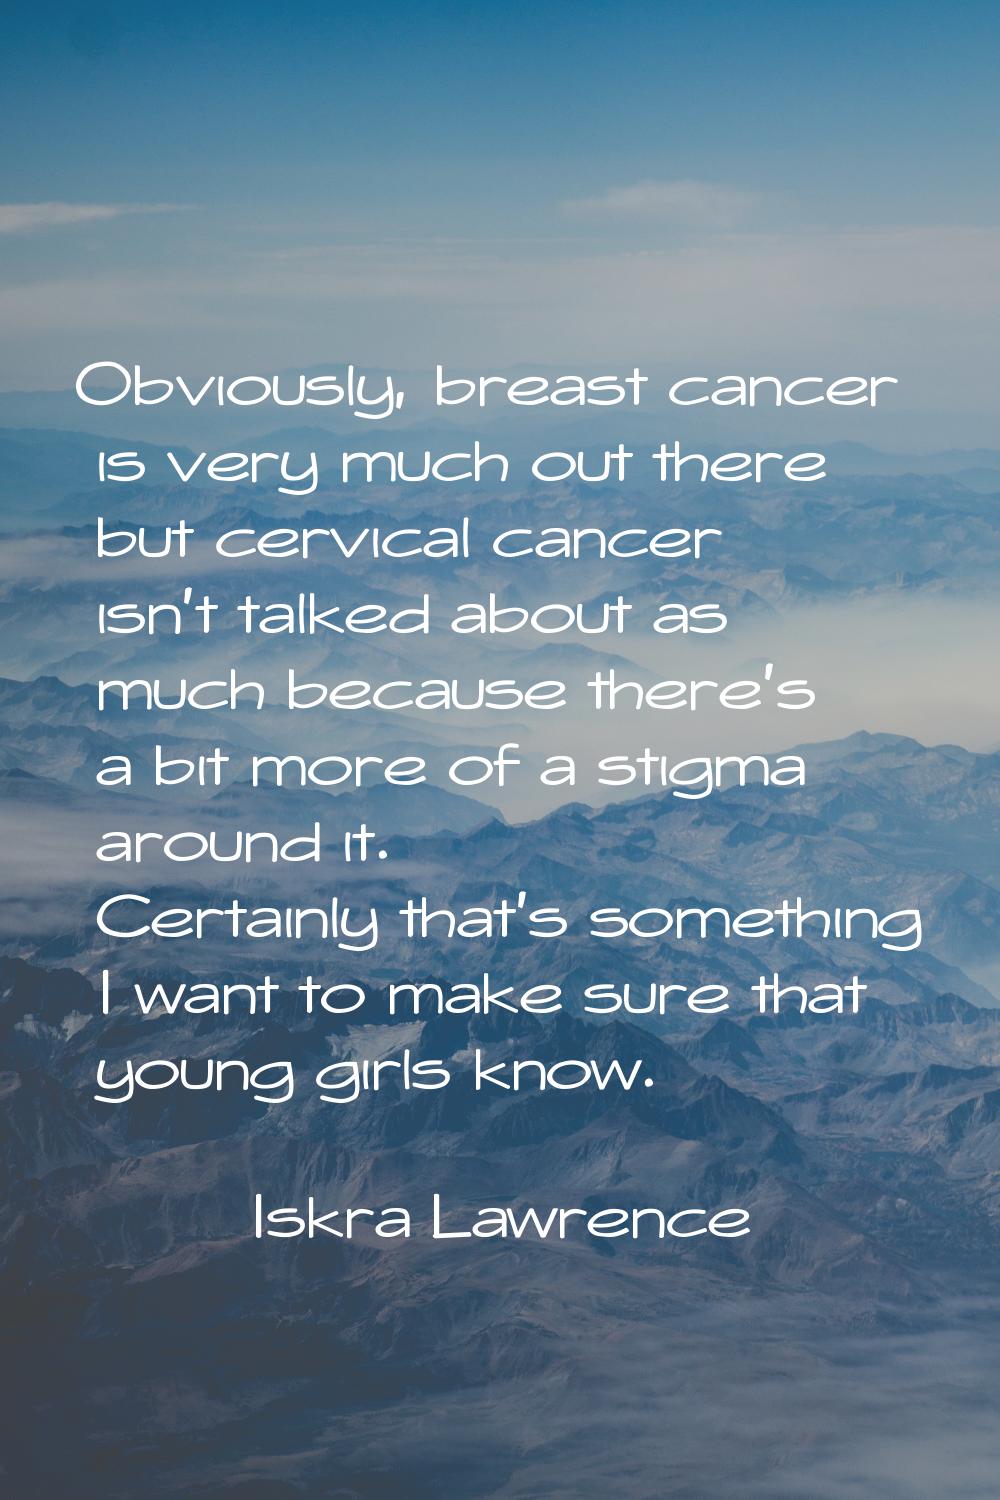 Obviously, breast cancer is very much out there but cervical cancer isn't talked about as much beca